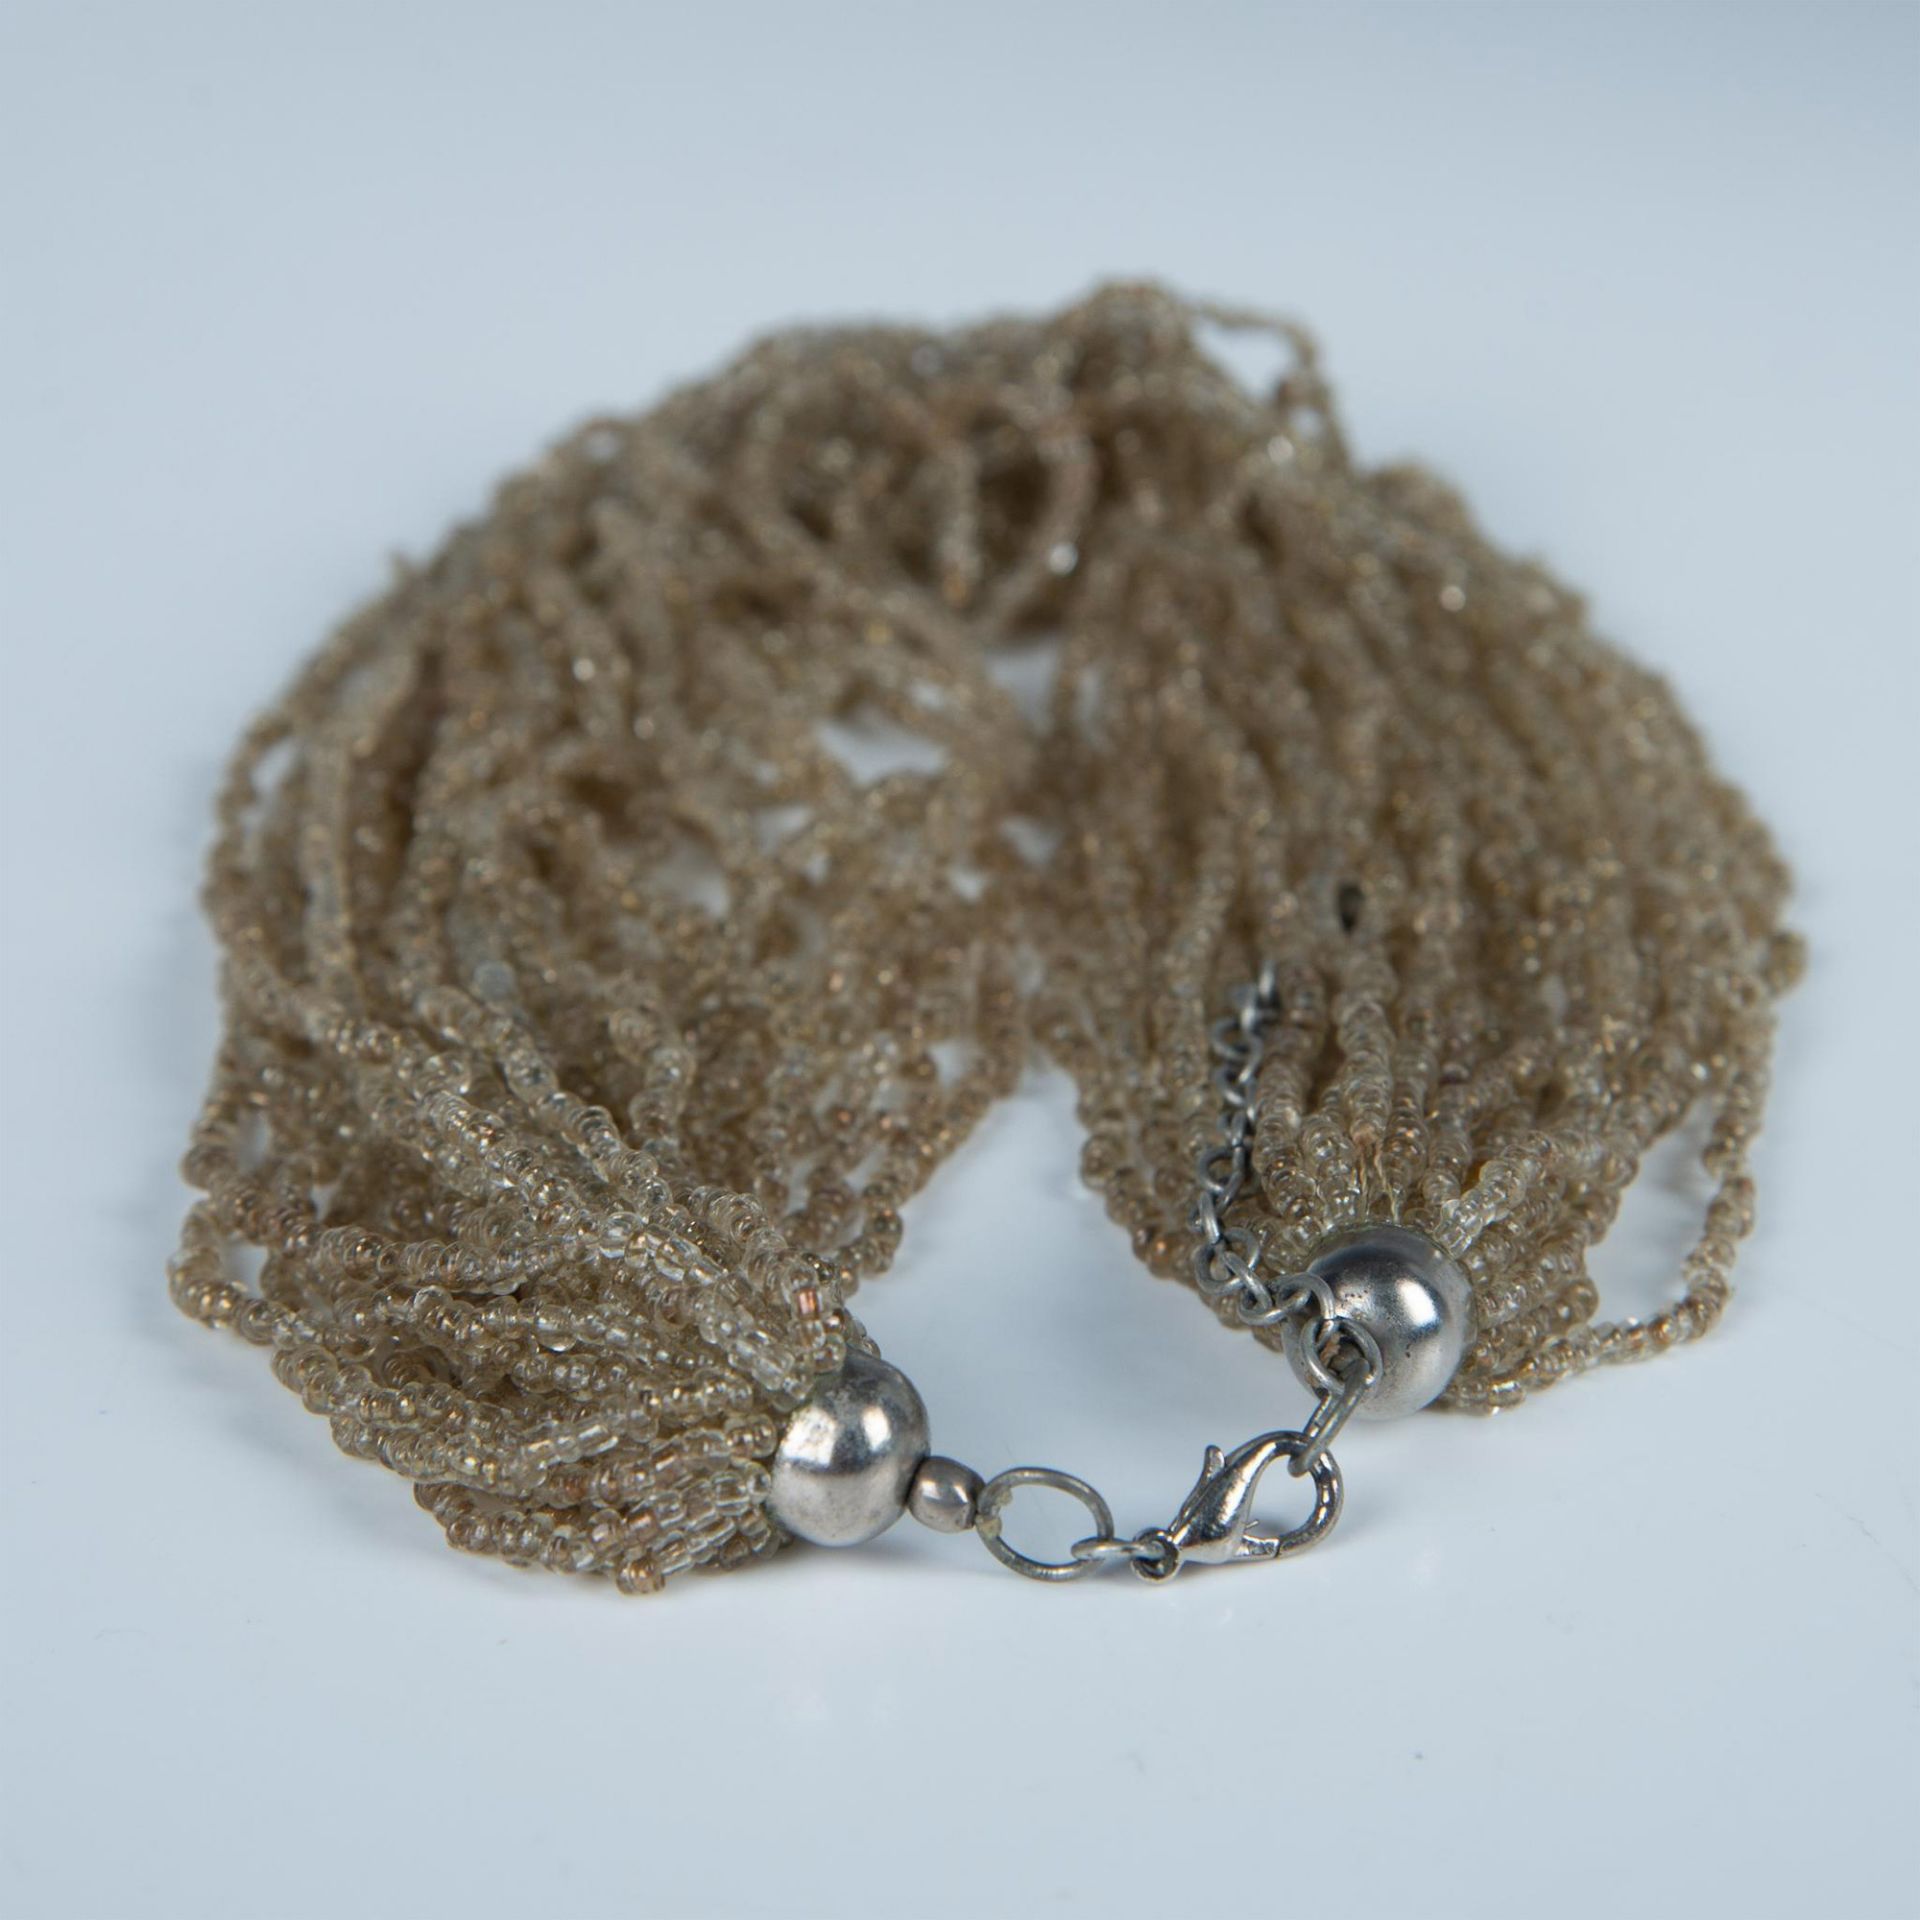 Beautiful Multi-Strand Champagne Bead Necklace - Image 3 of 3